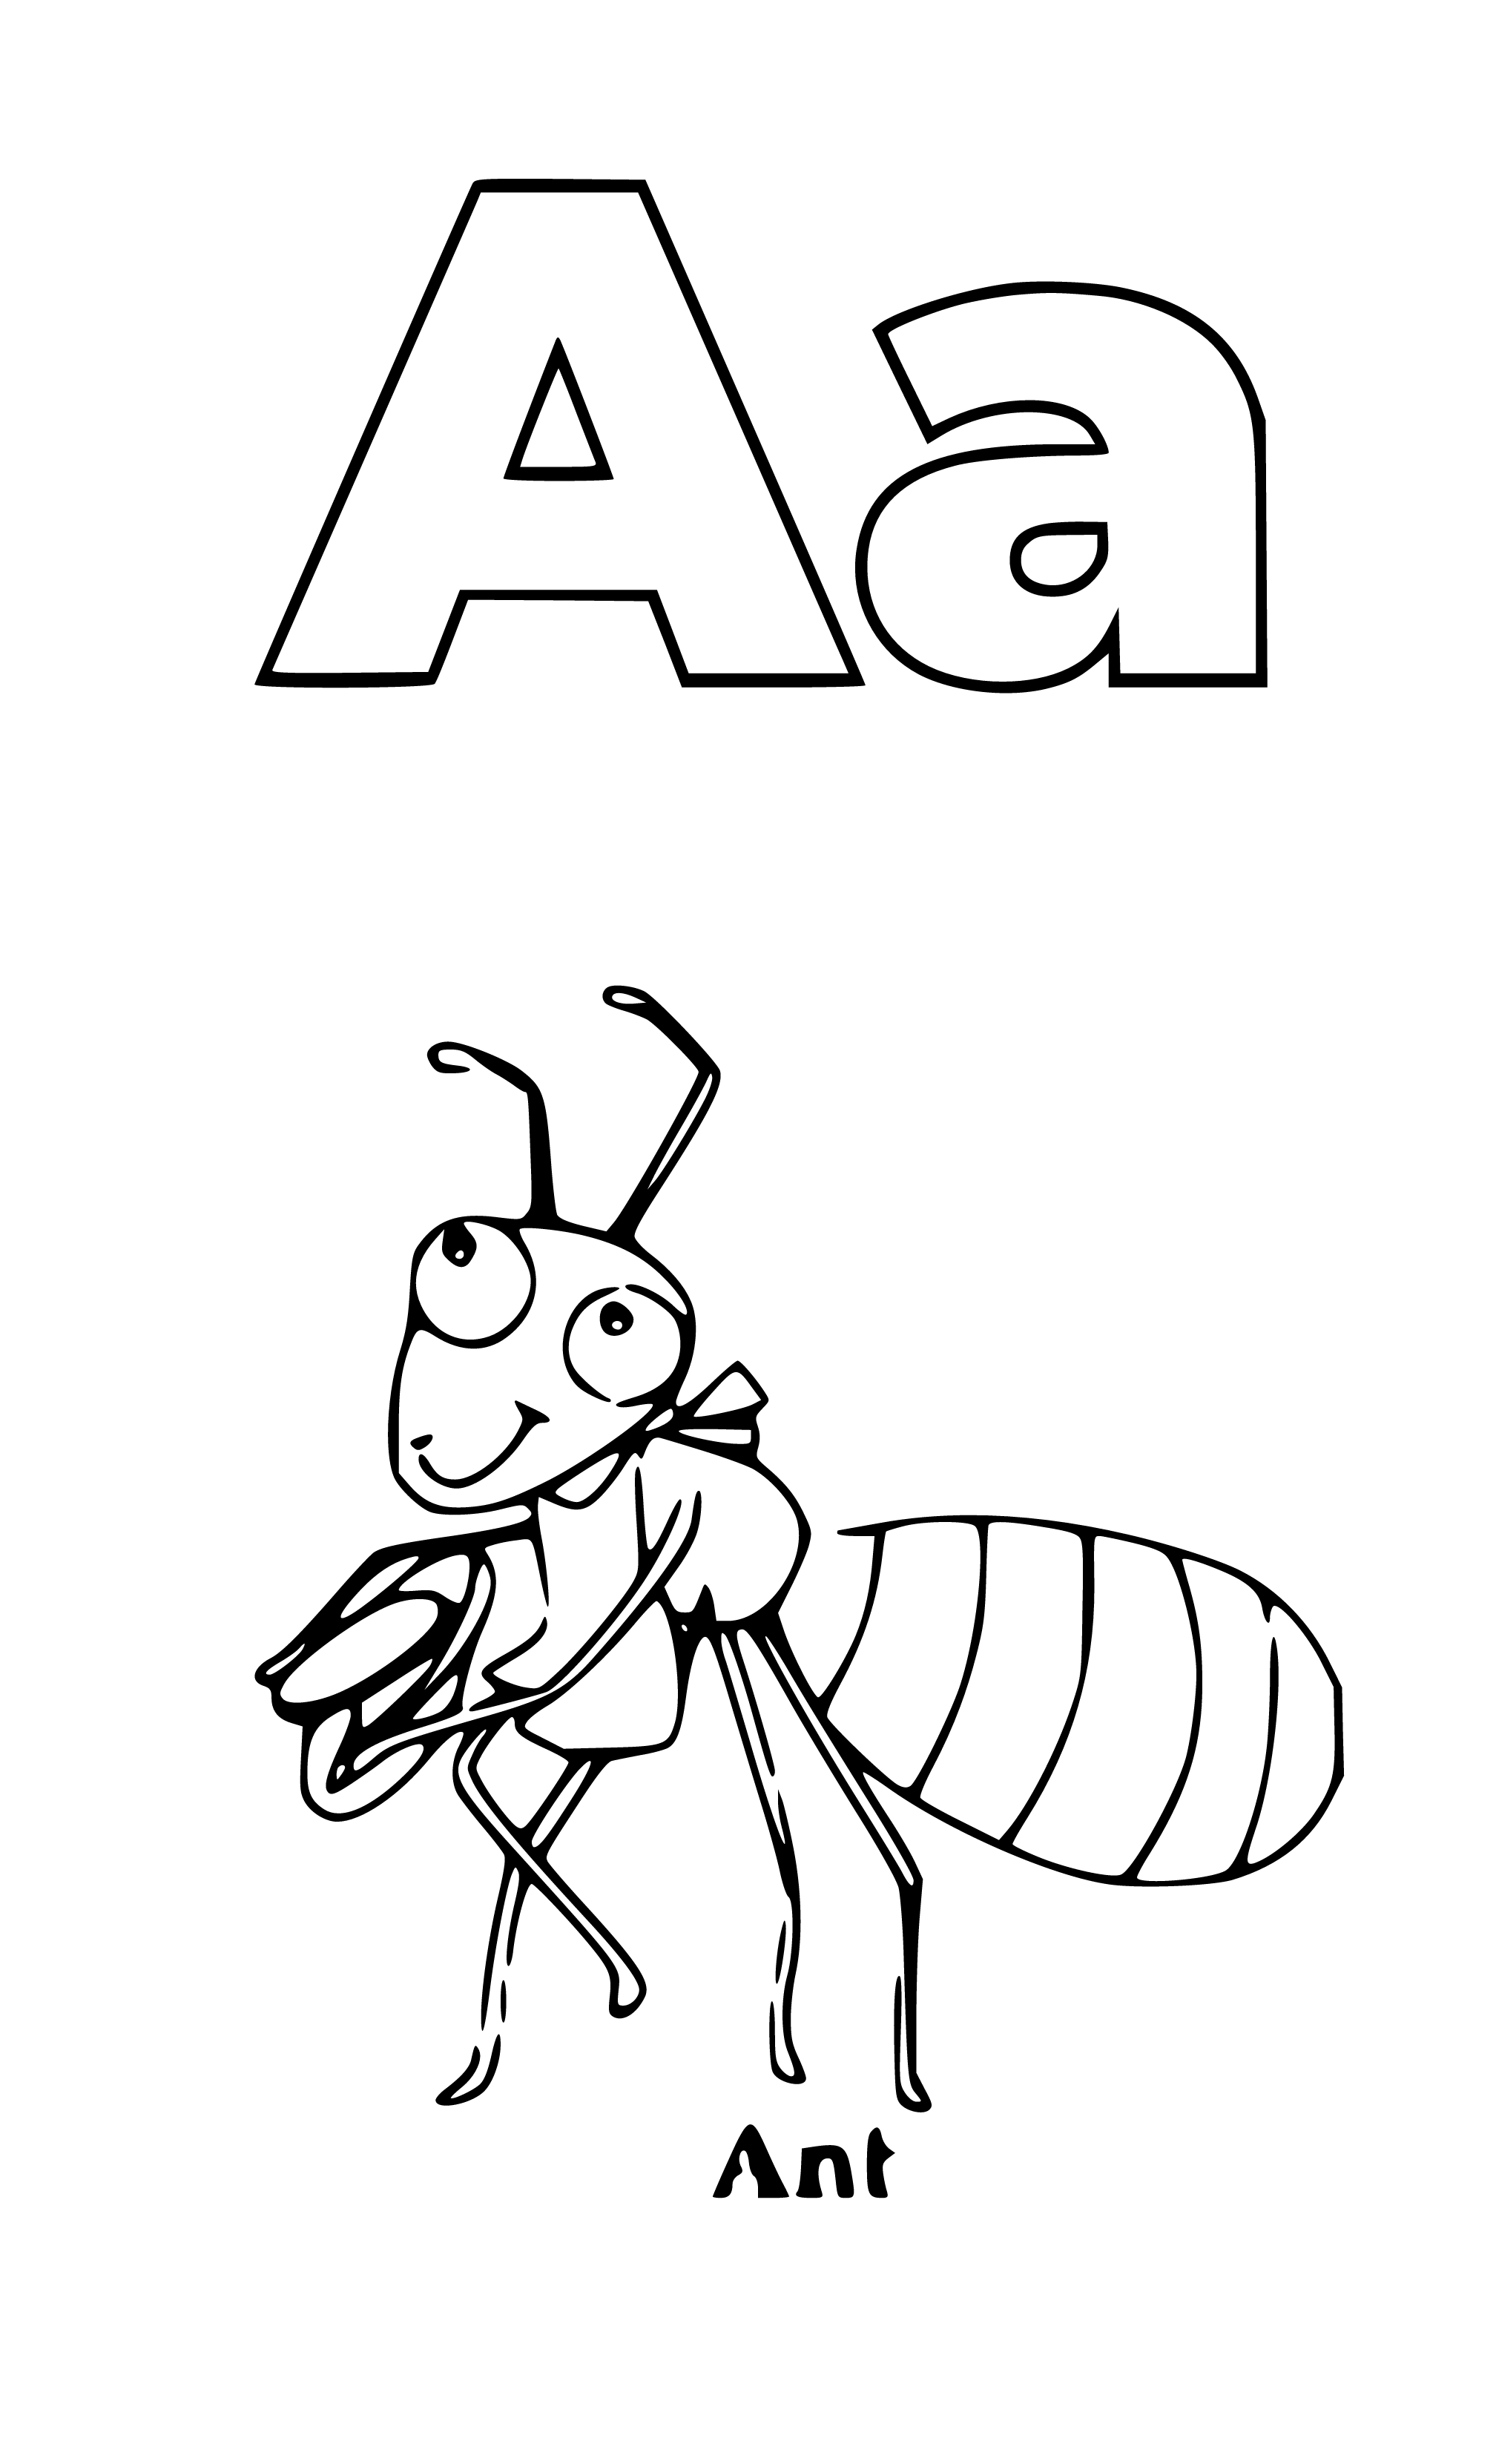 Letter A Coloring Page (alphabet learning: a is for ant) - SheetalColor.com